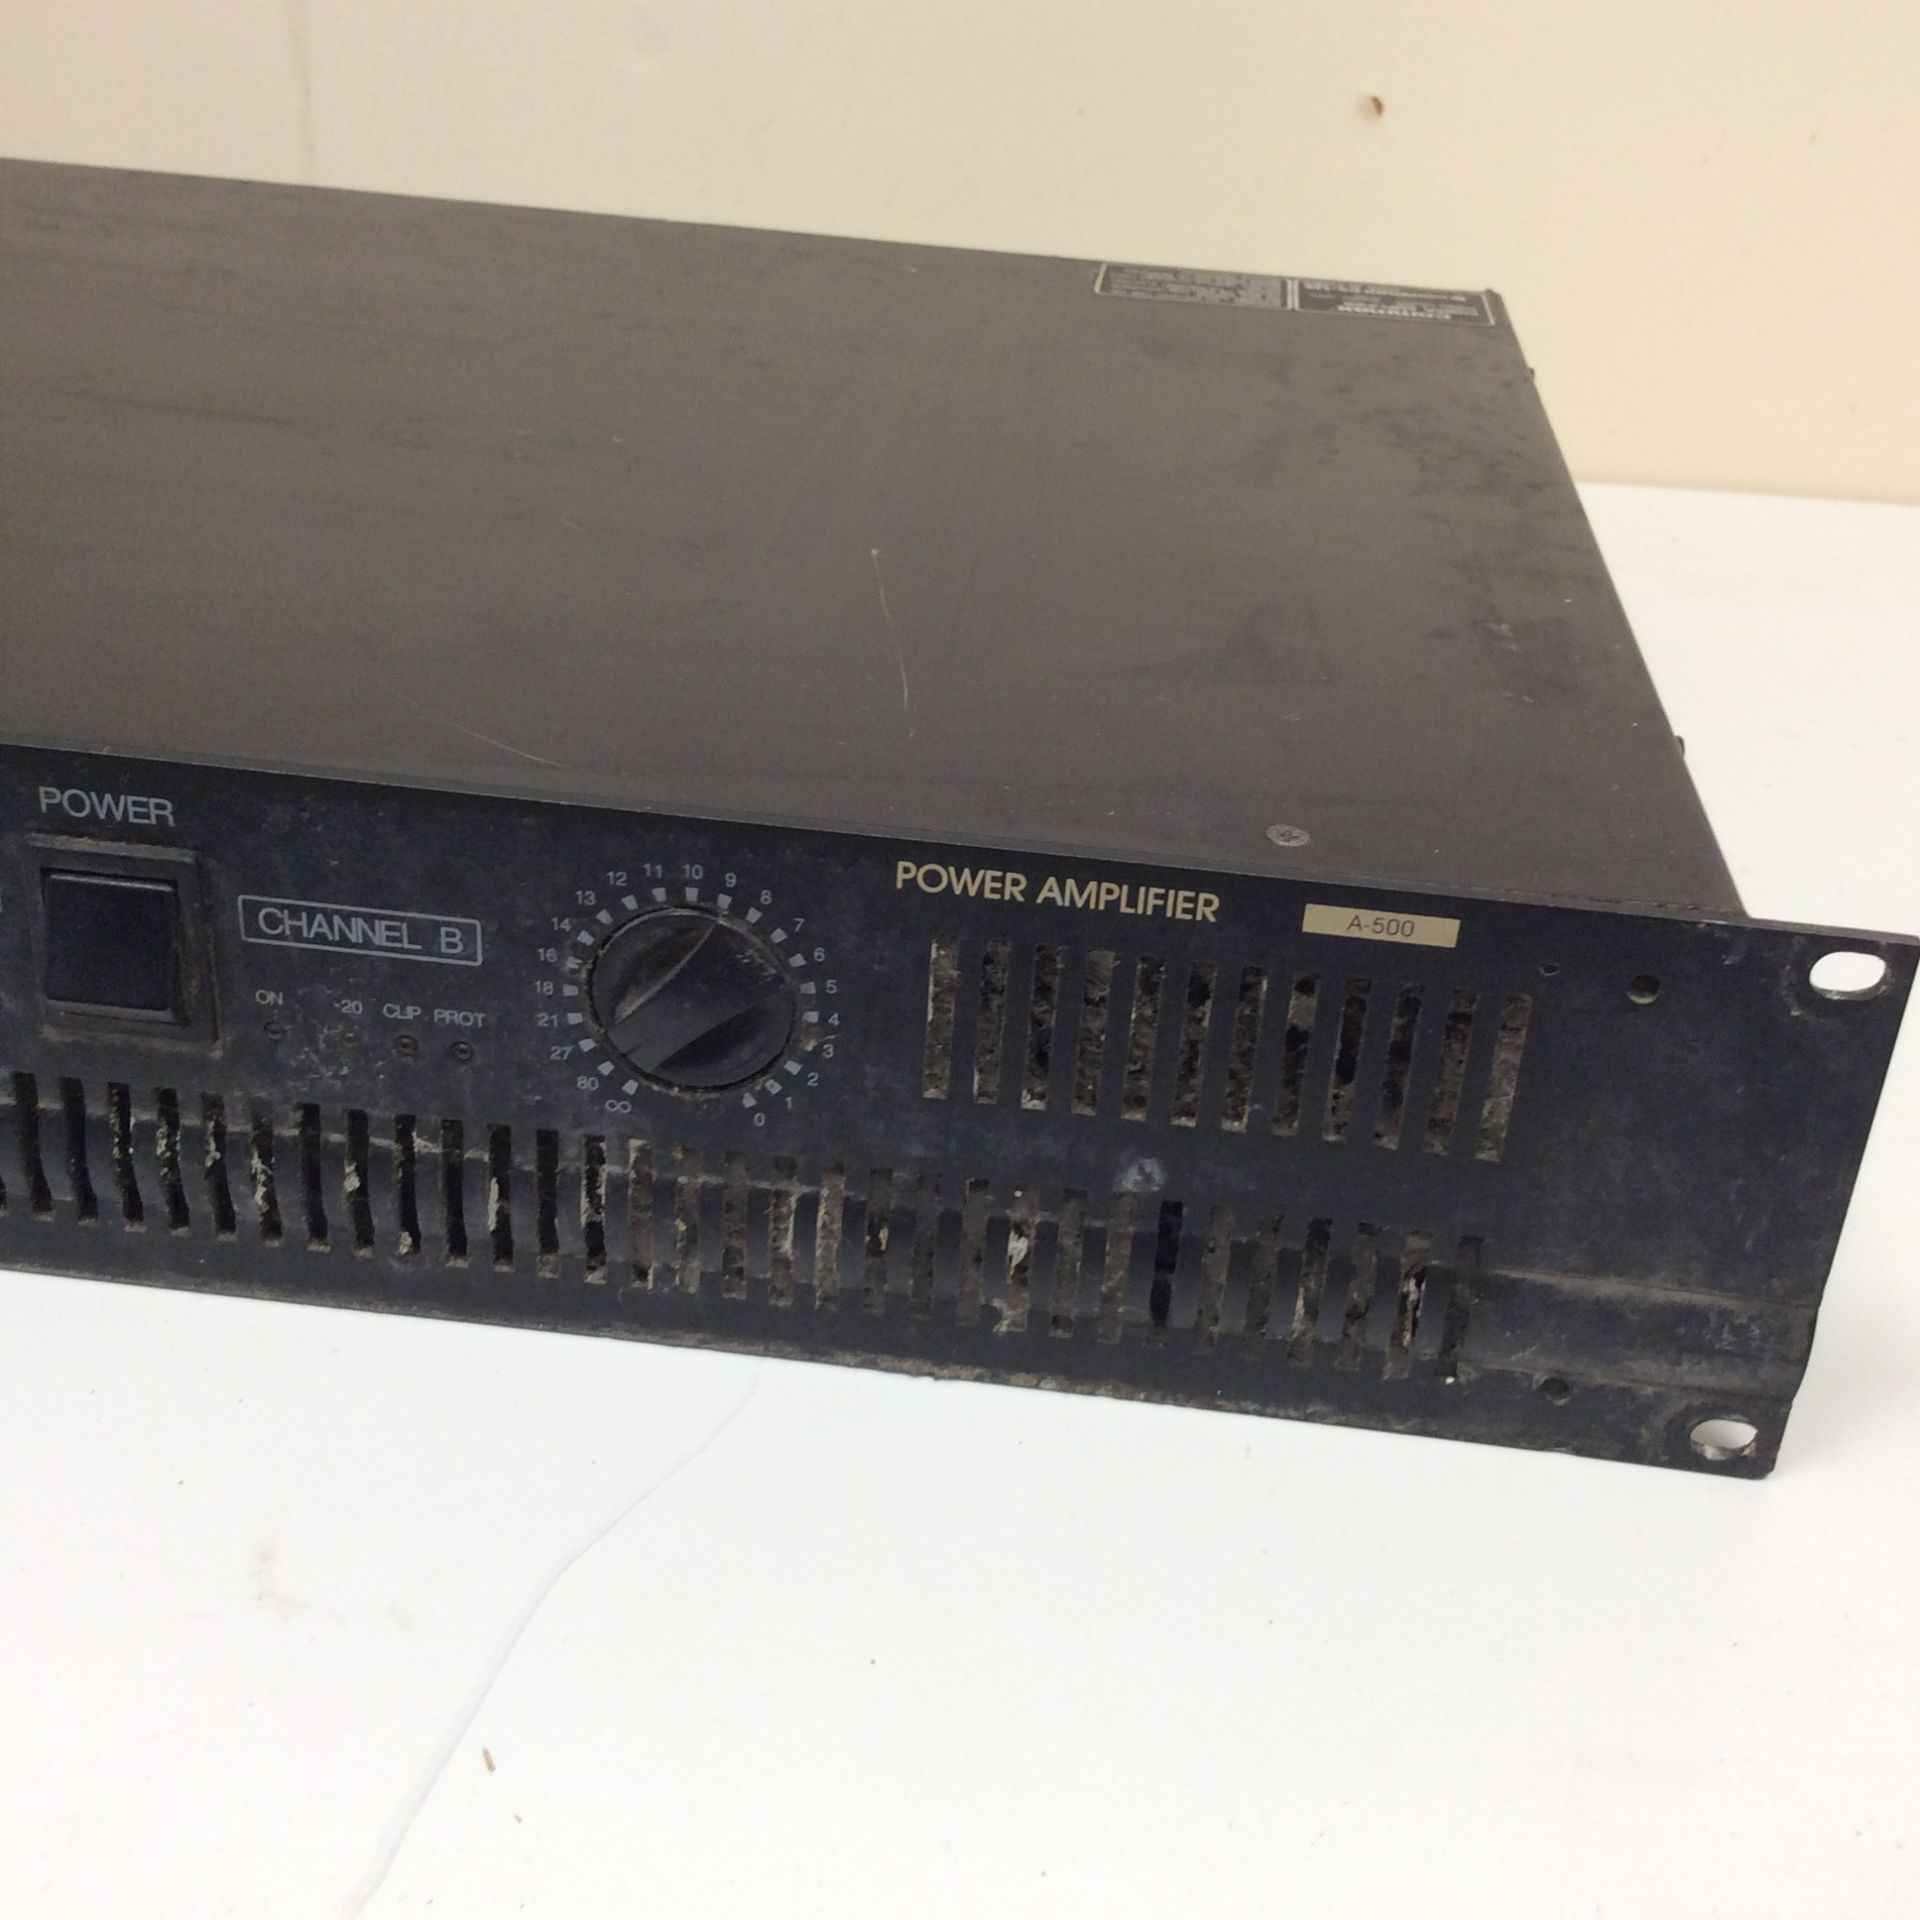 Commax power amplifier a-500 - Image 4 of 7